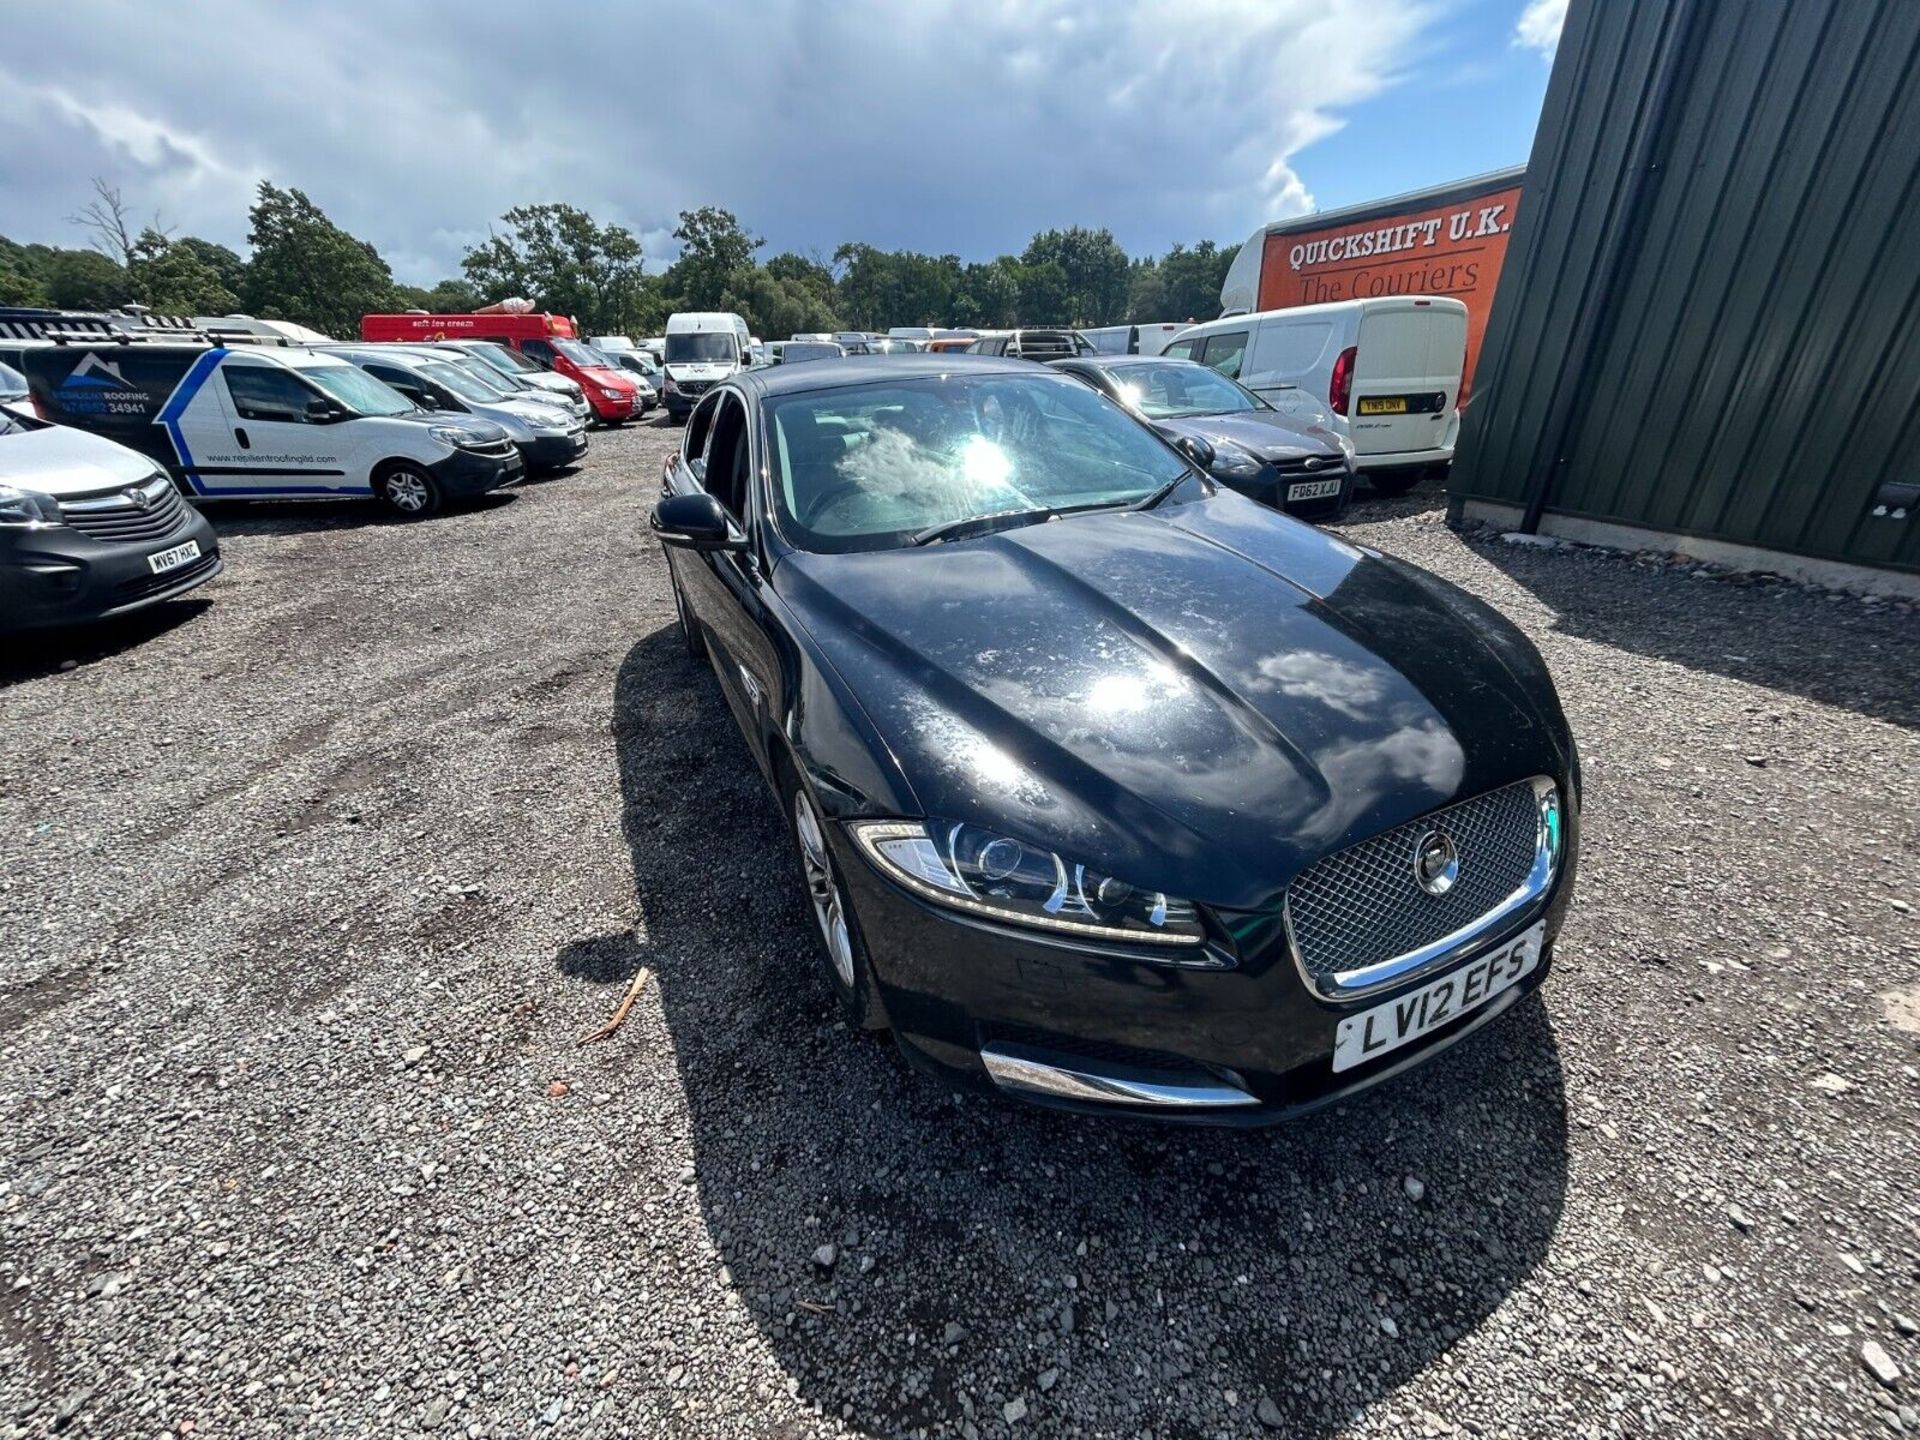 JAGUAR XF DIESEL SALOON 2.2D LUXURY 4DR AUTO 12 MONTHS MOT (NO VAT ON HAMMER) - IN DAILY USE - Image 4 of 19